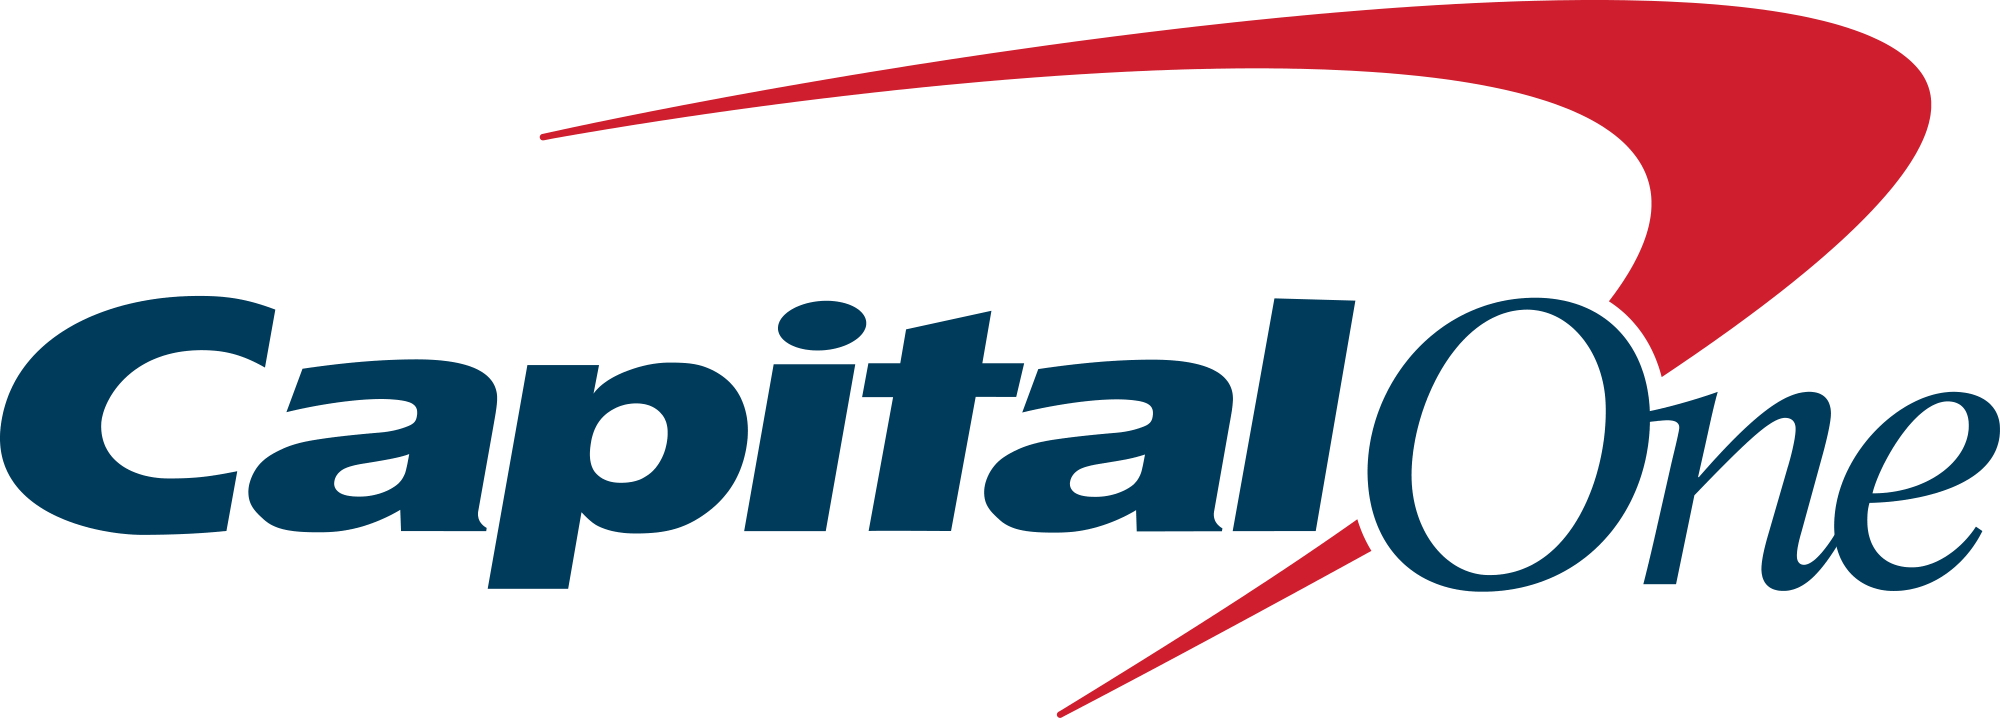 Capital One Business.png